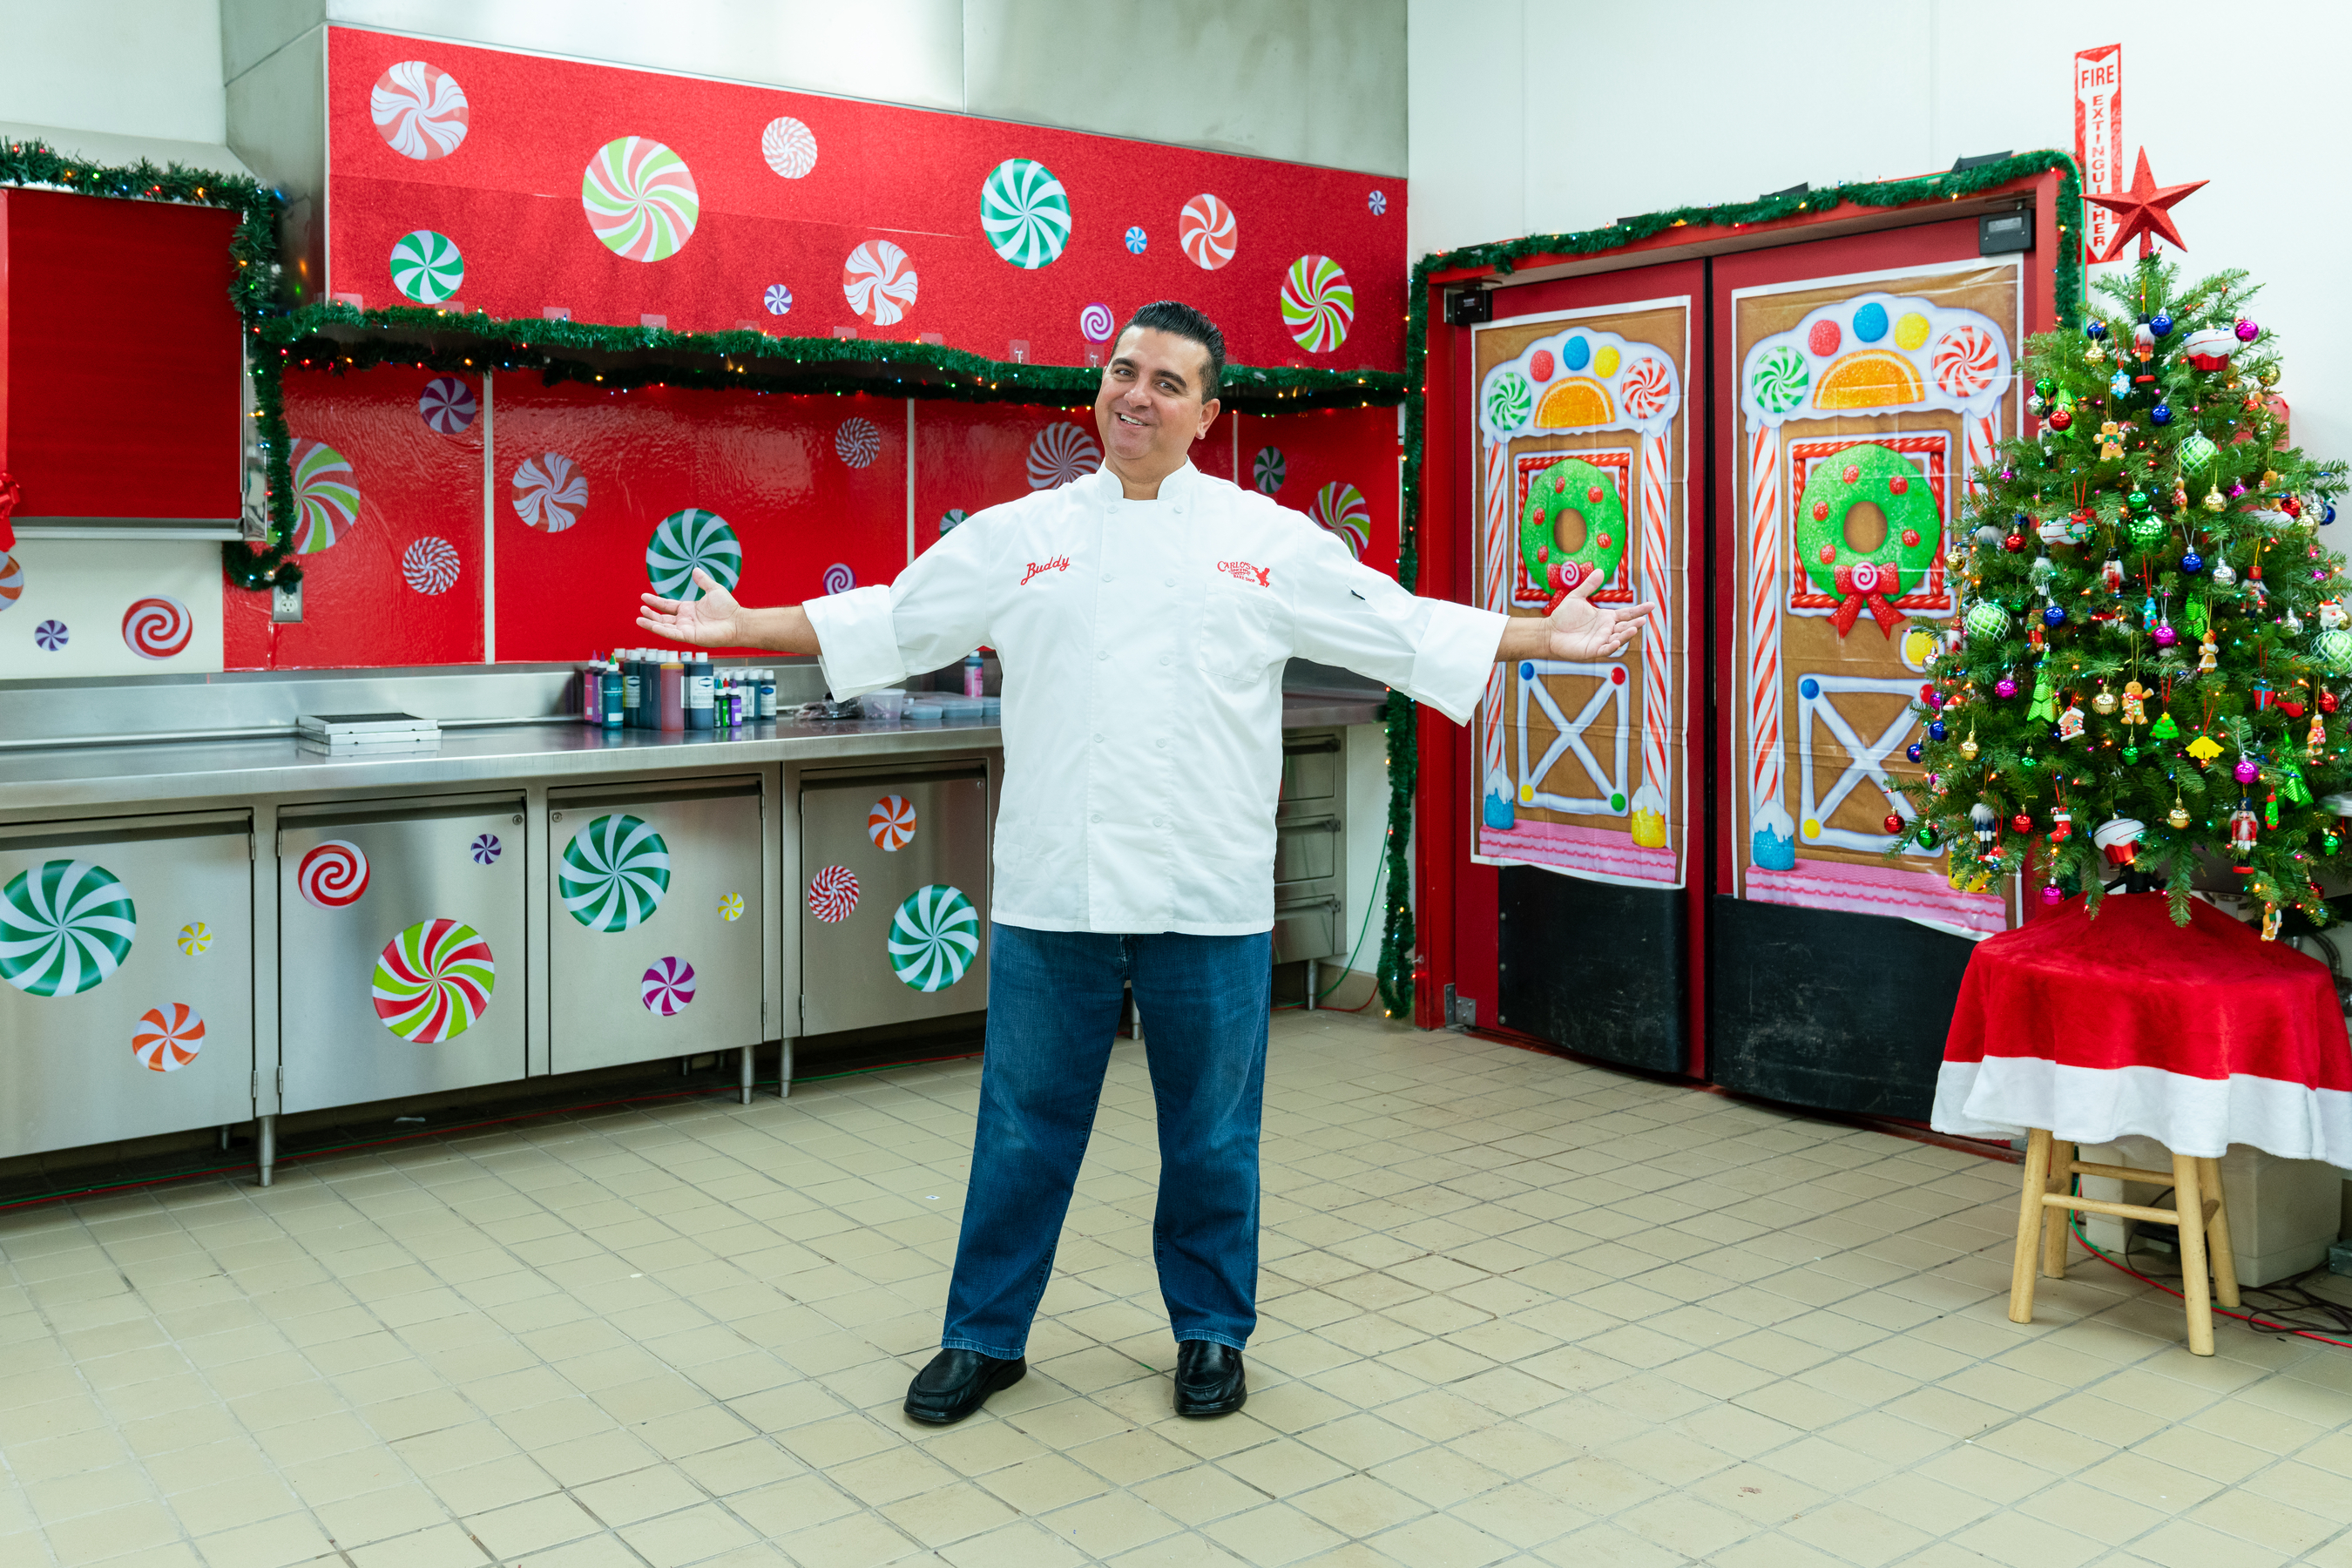 Where Does Buddy Valastro Live? Photos of His New Jersey Home